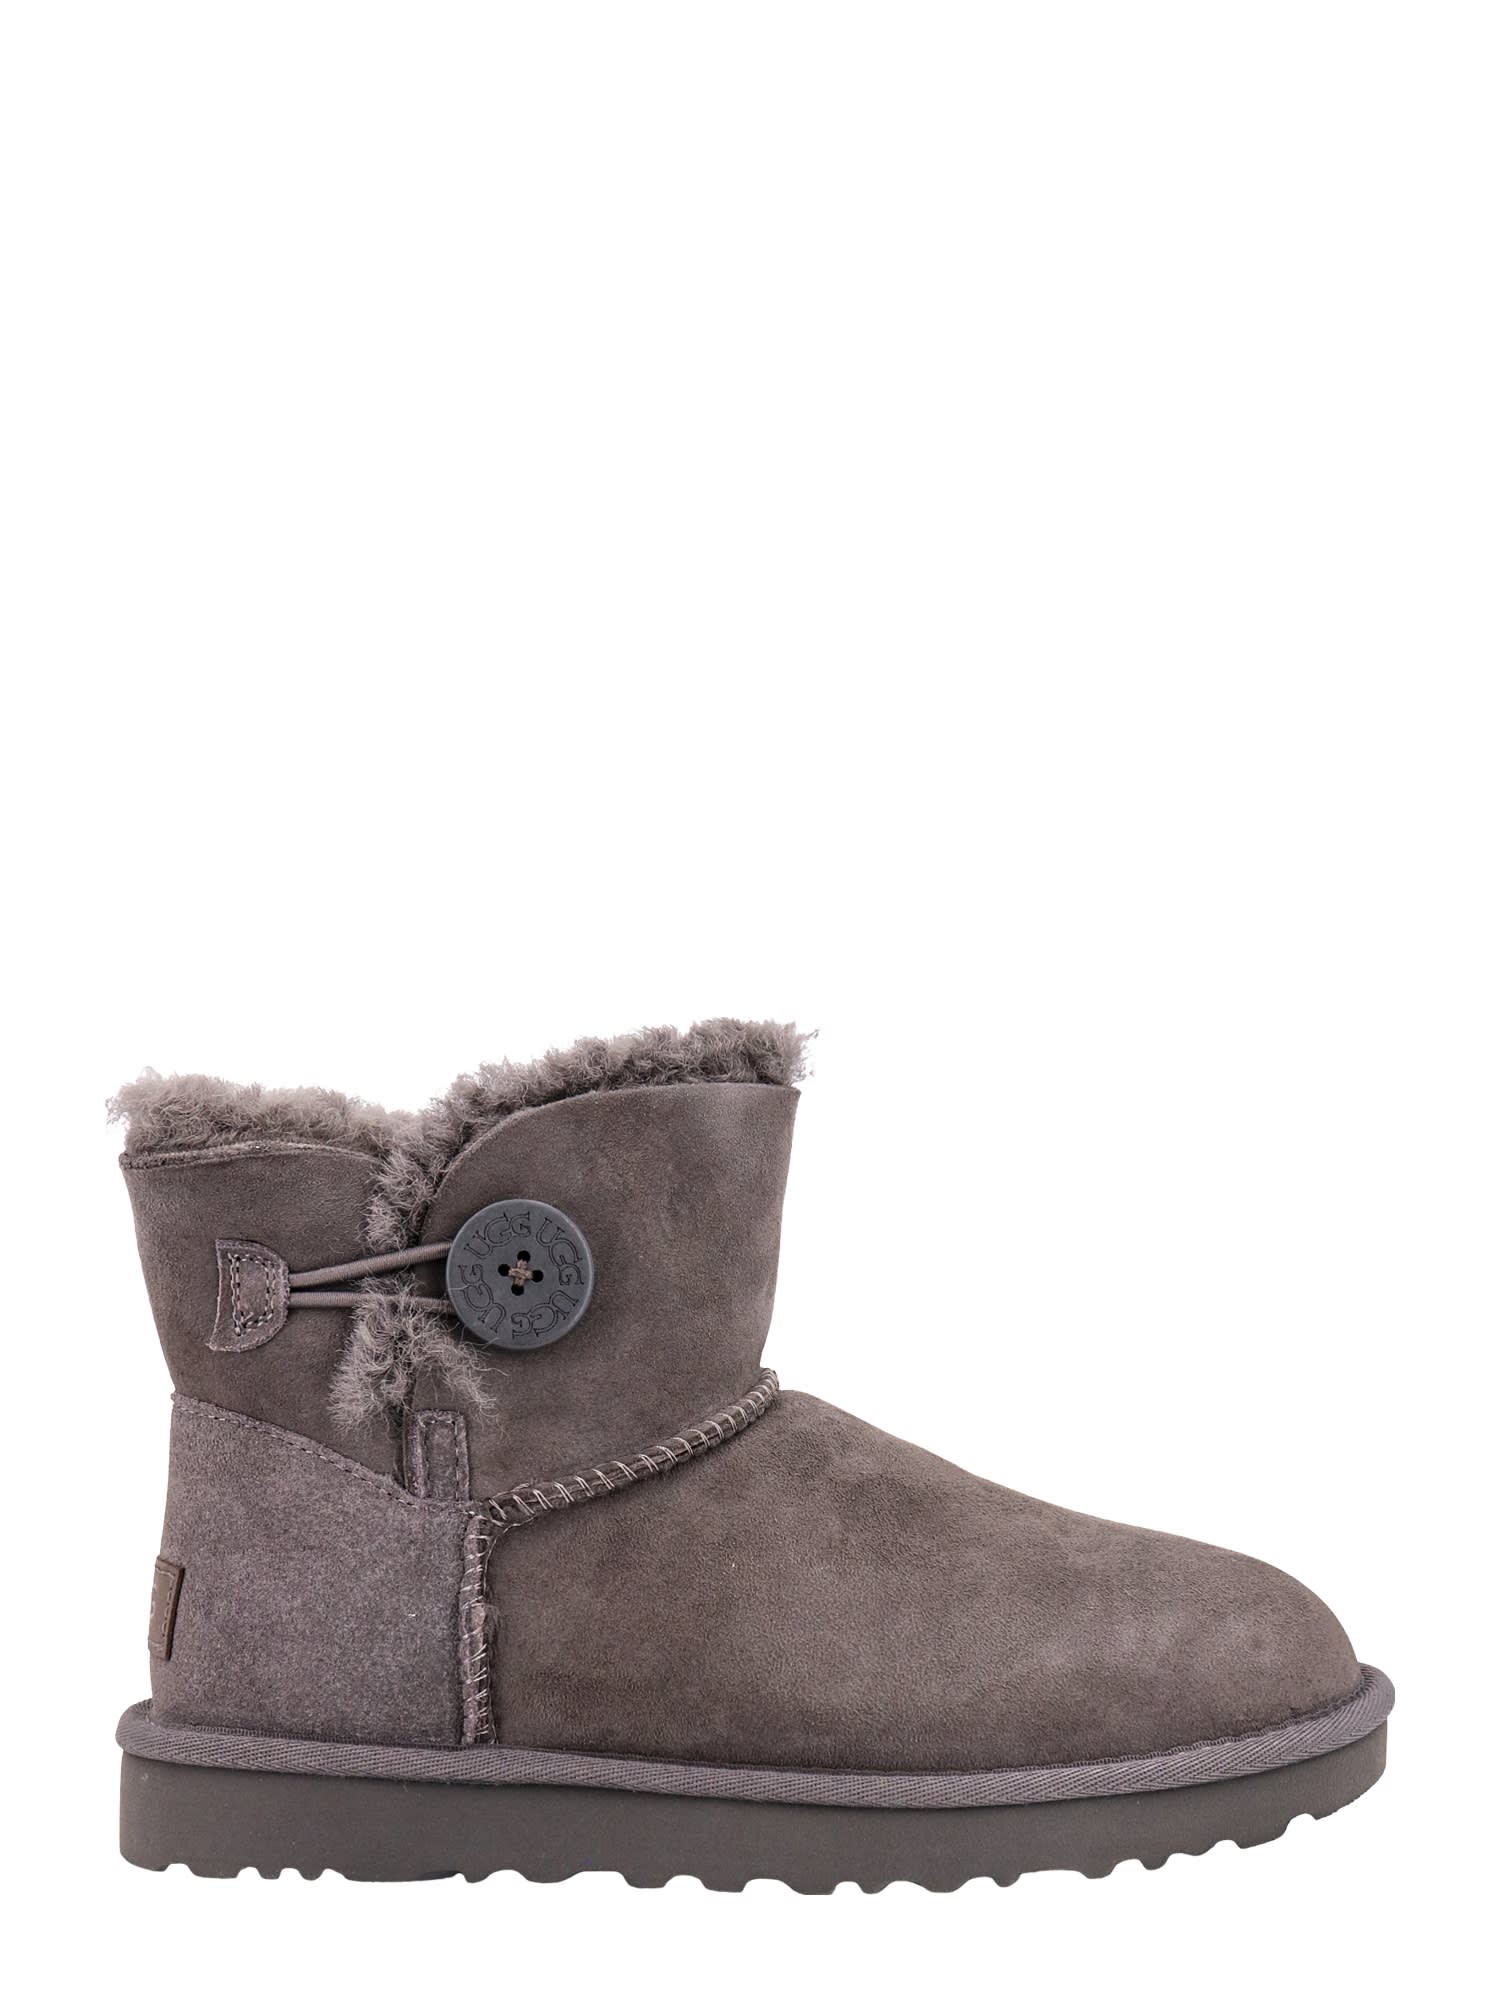 UGG MINI BALEY BUTTON ANKLE BOOTS